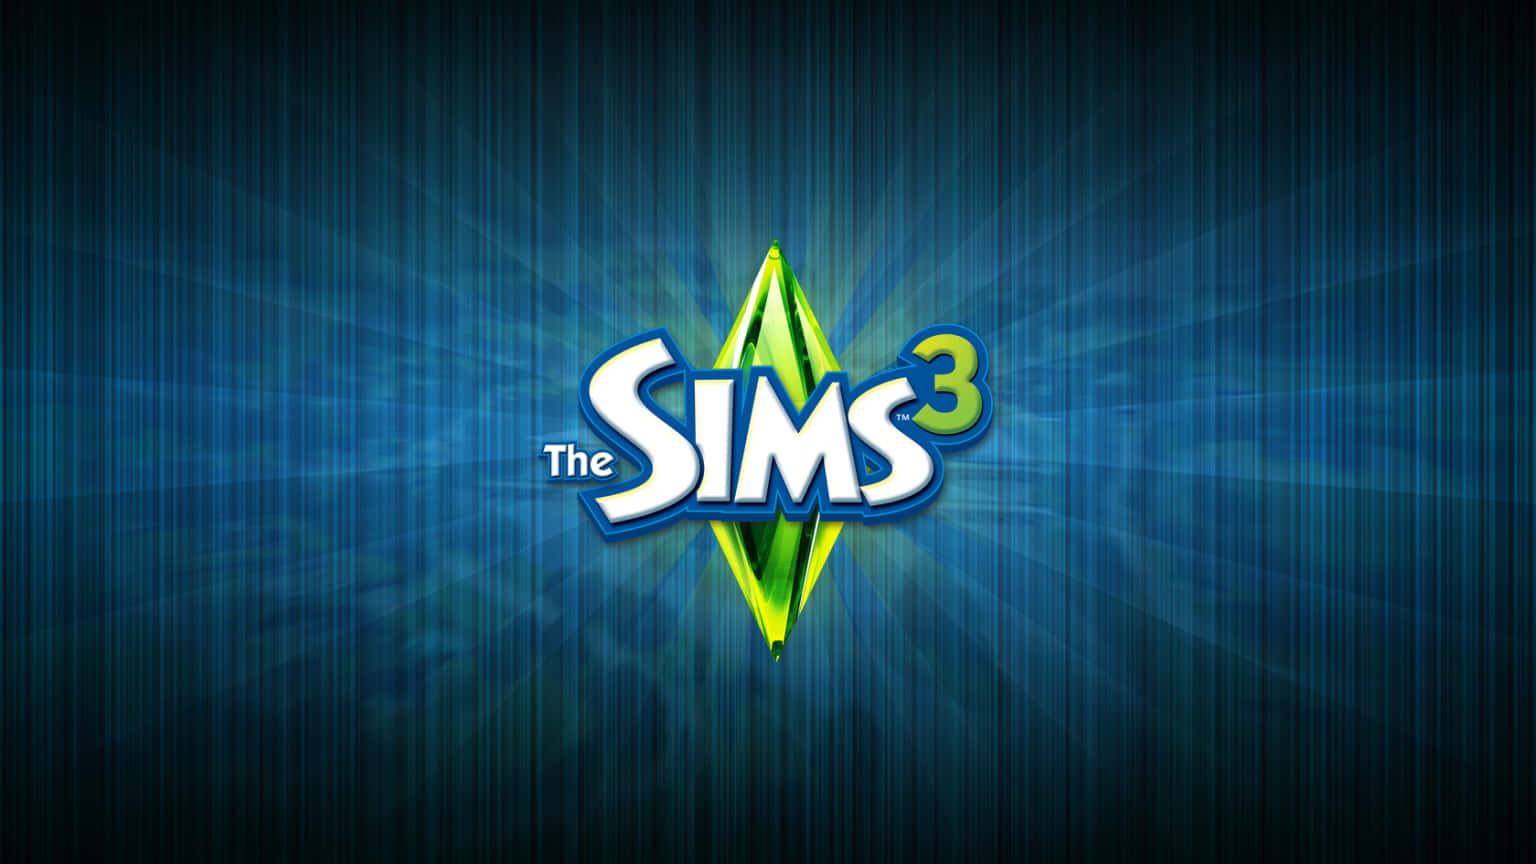 Create a unique Sims world with The Sims 3 Wallpaper